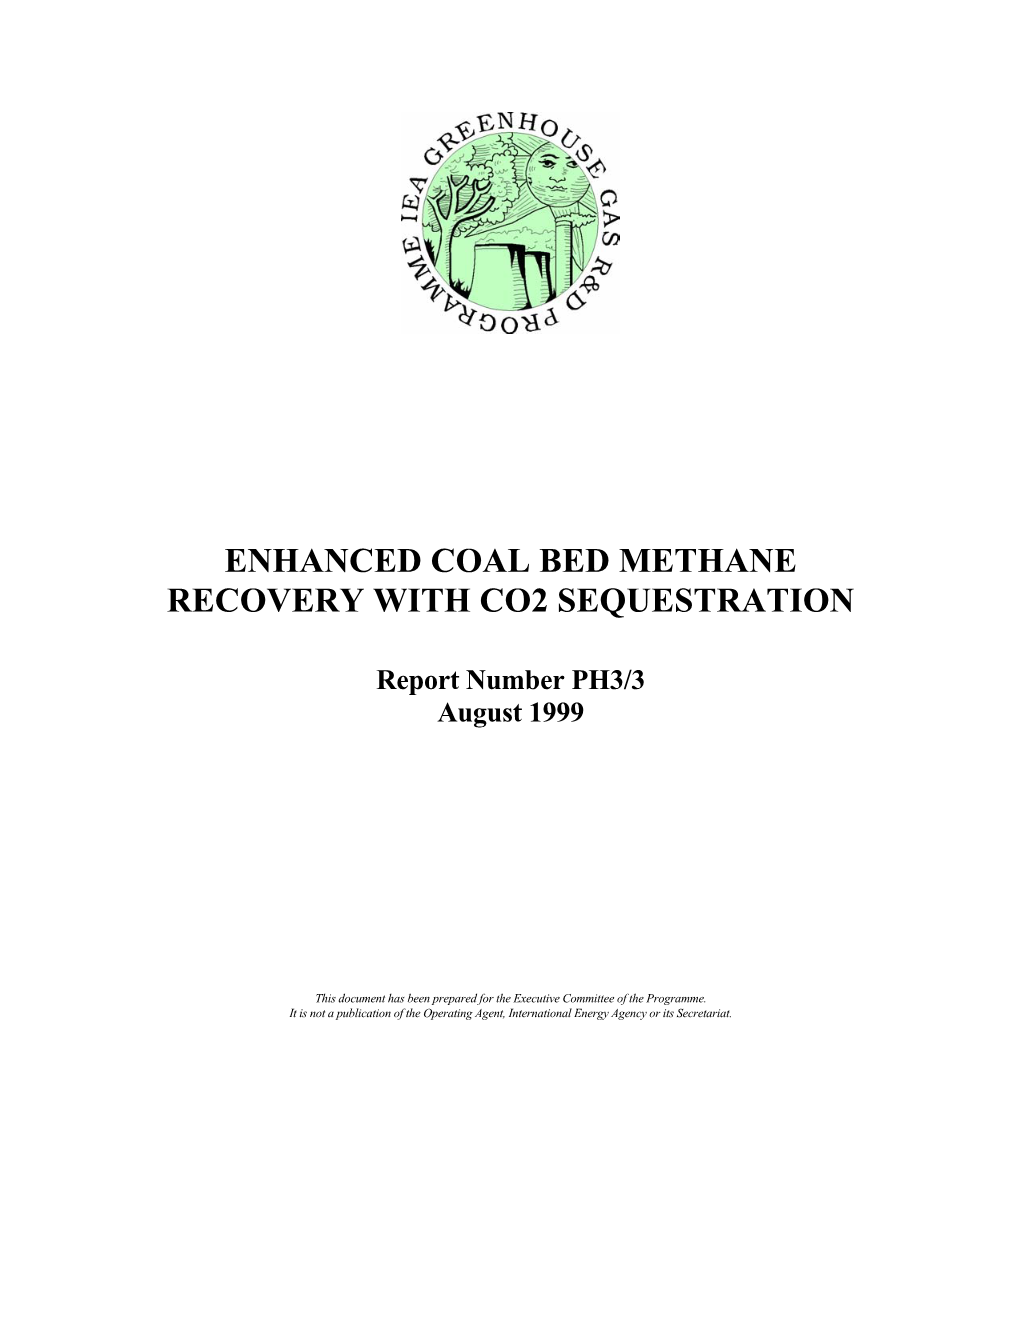 Enhanced Coal Bed Methane Recovery Worldwide Application and CO2